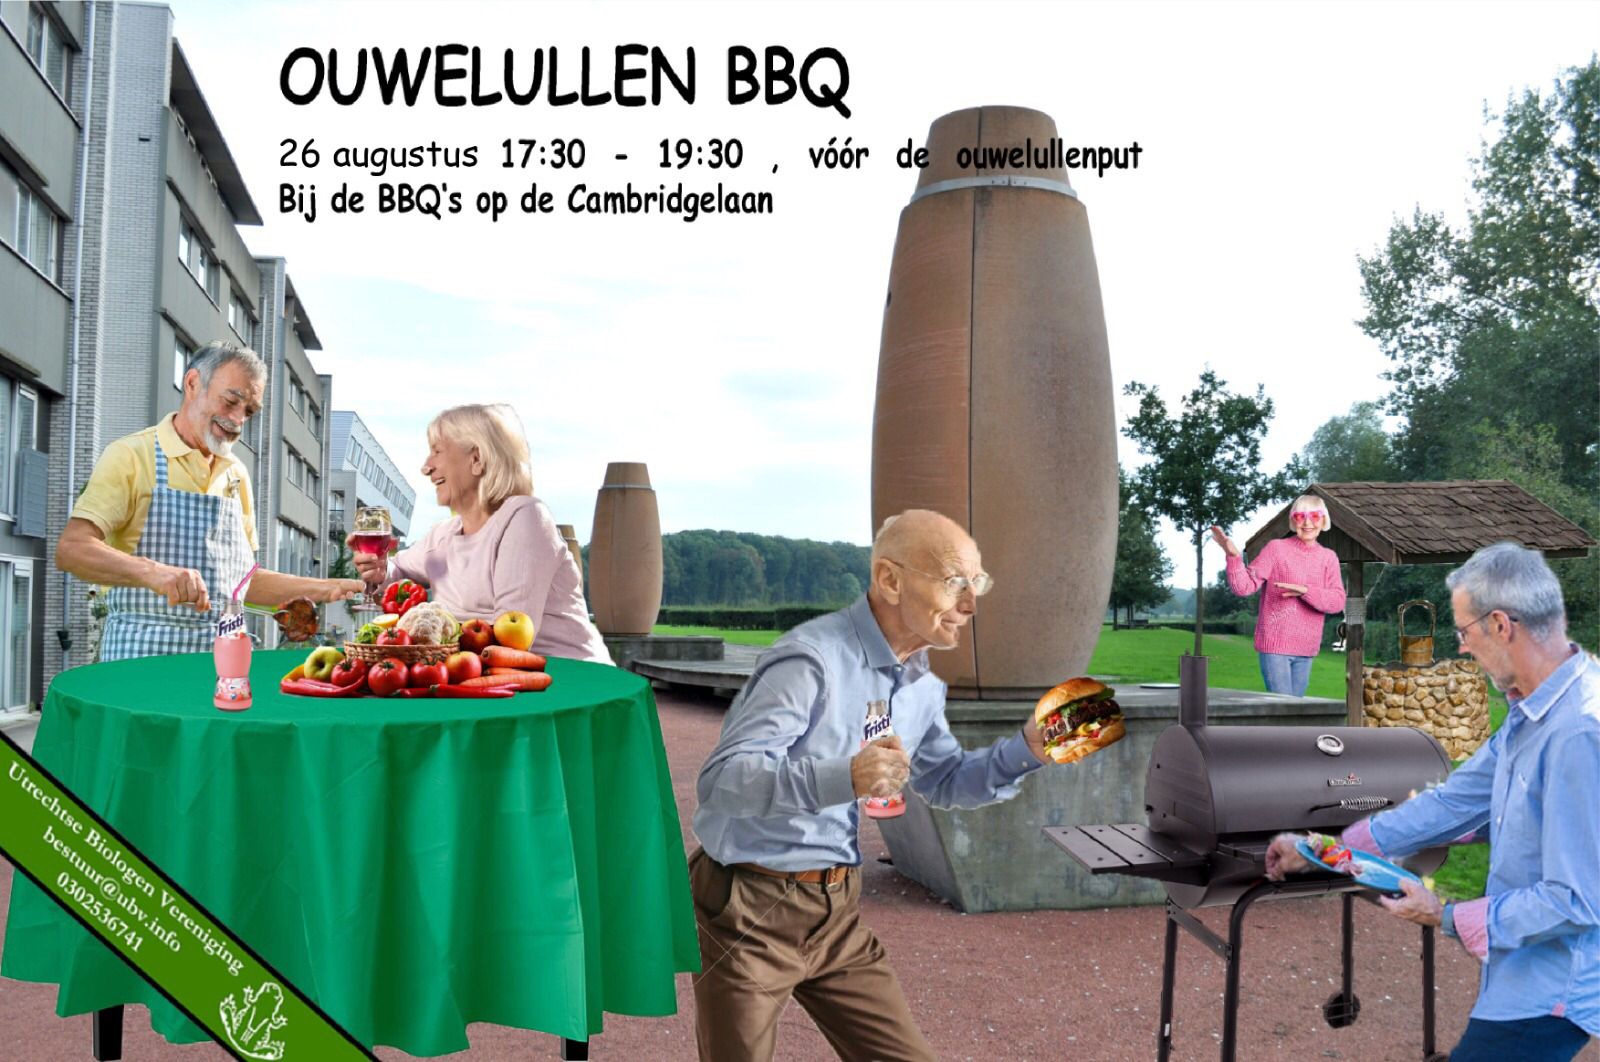 Ouwelullen barbecue